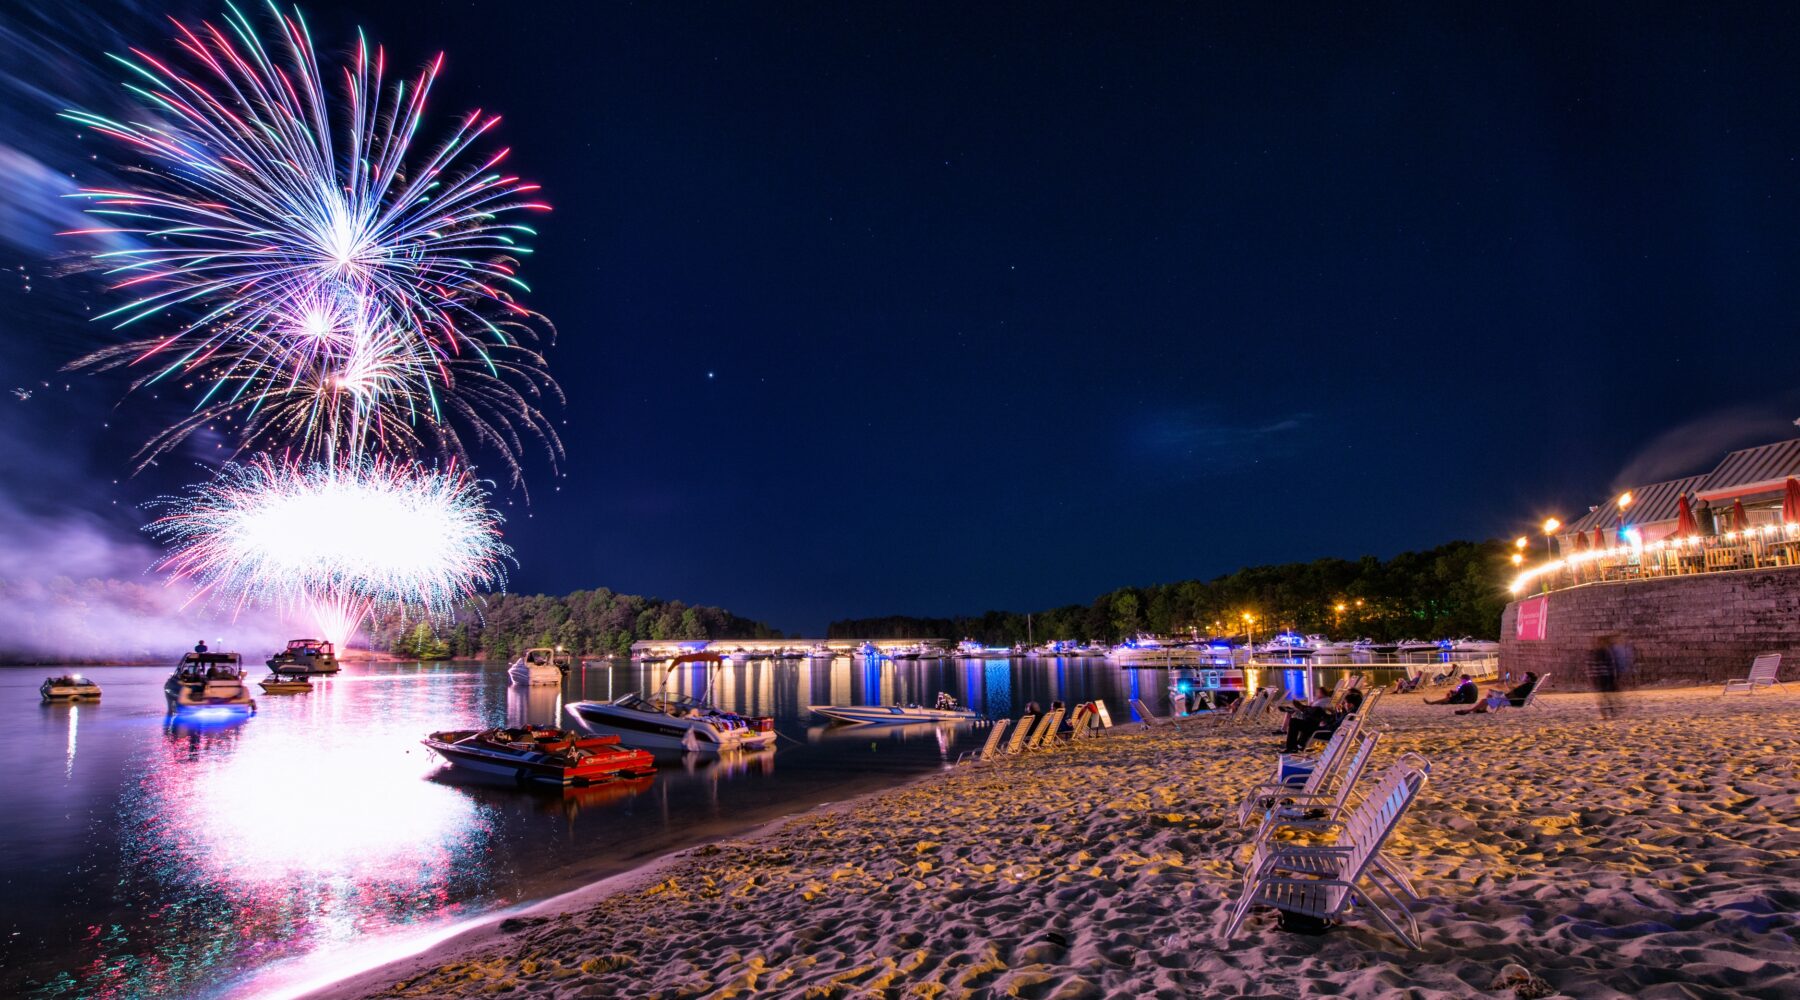 Lake lanier islands fireworks show fourth of july